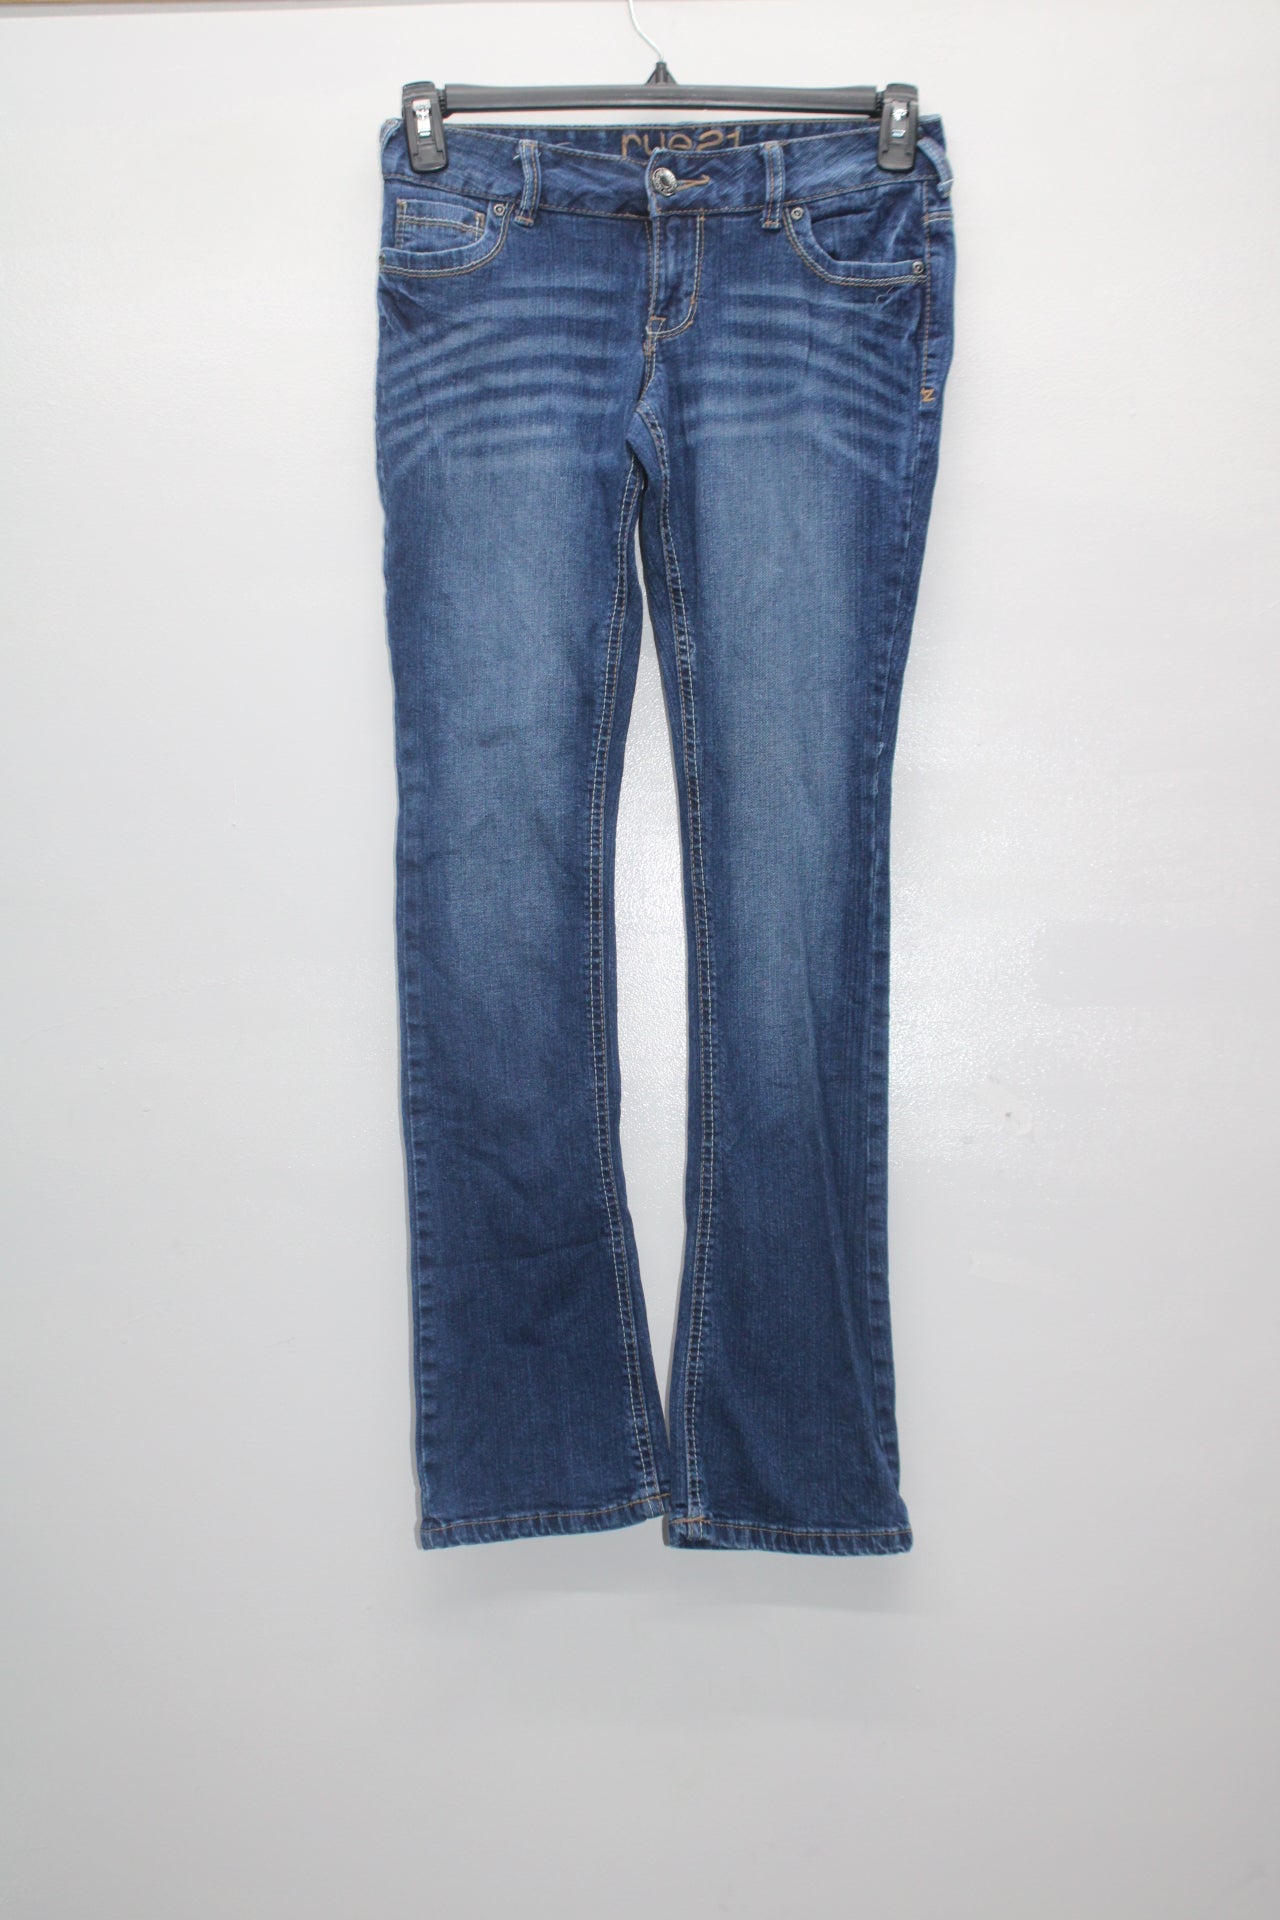 Rue21 Women's Jeans Skinny Boot Blue 1/2R Pre-Owned